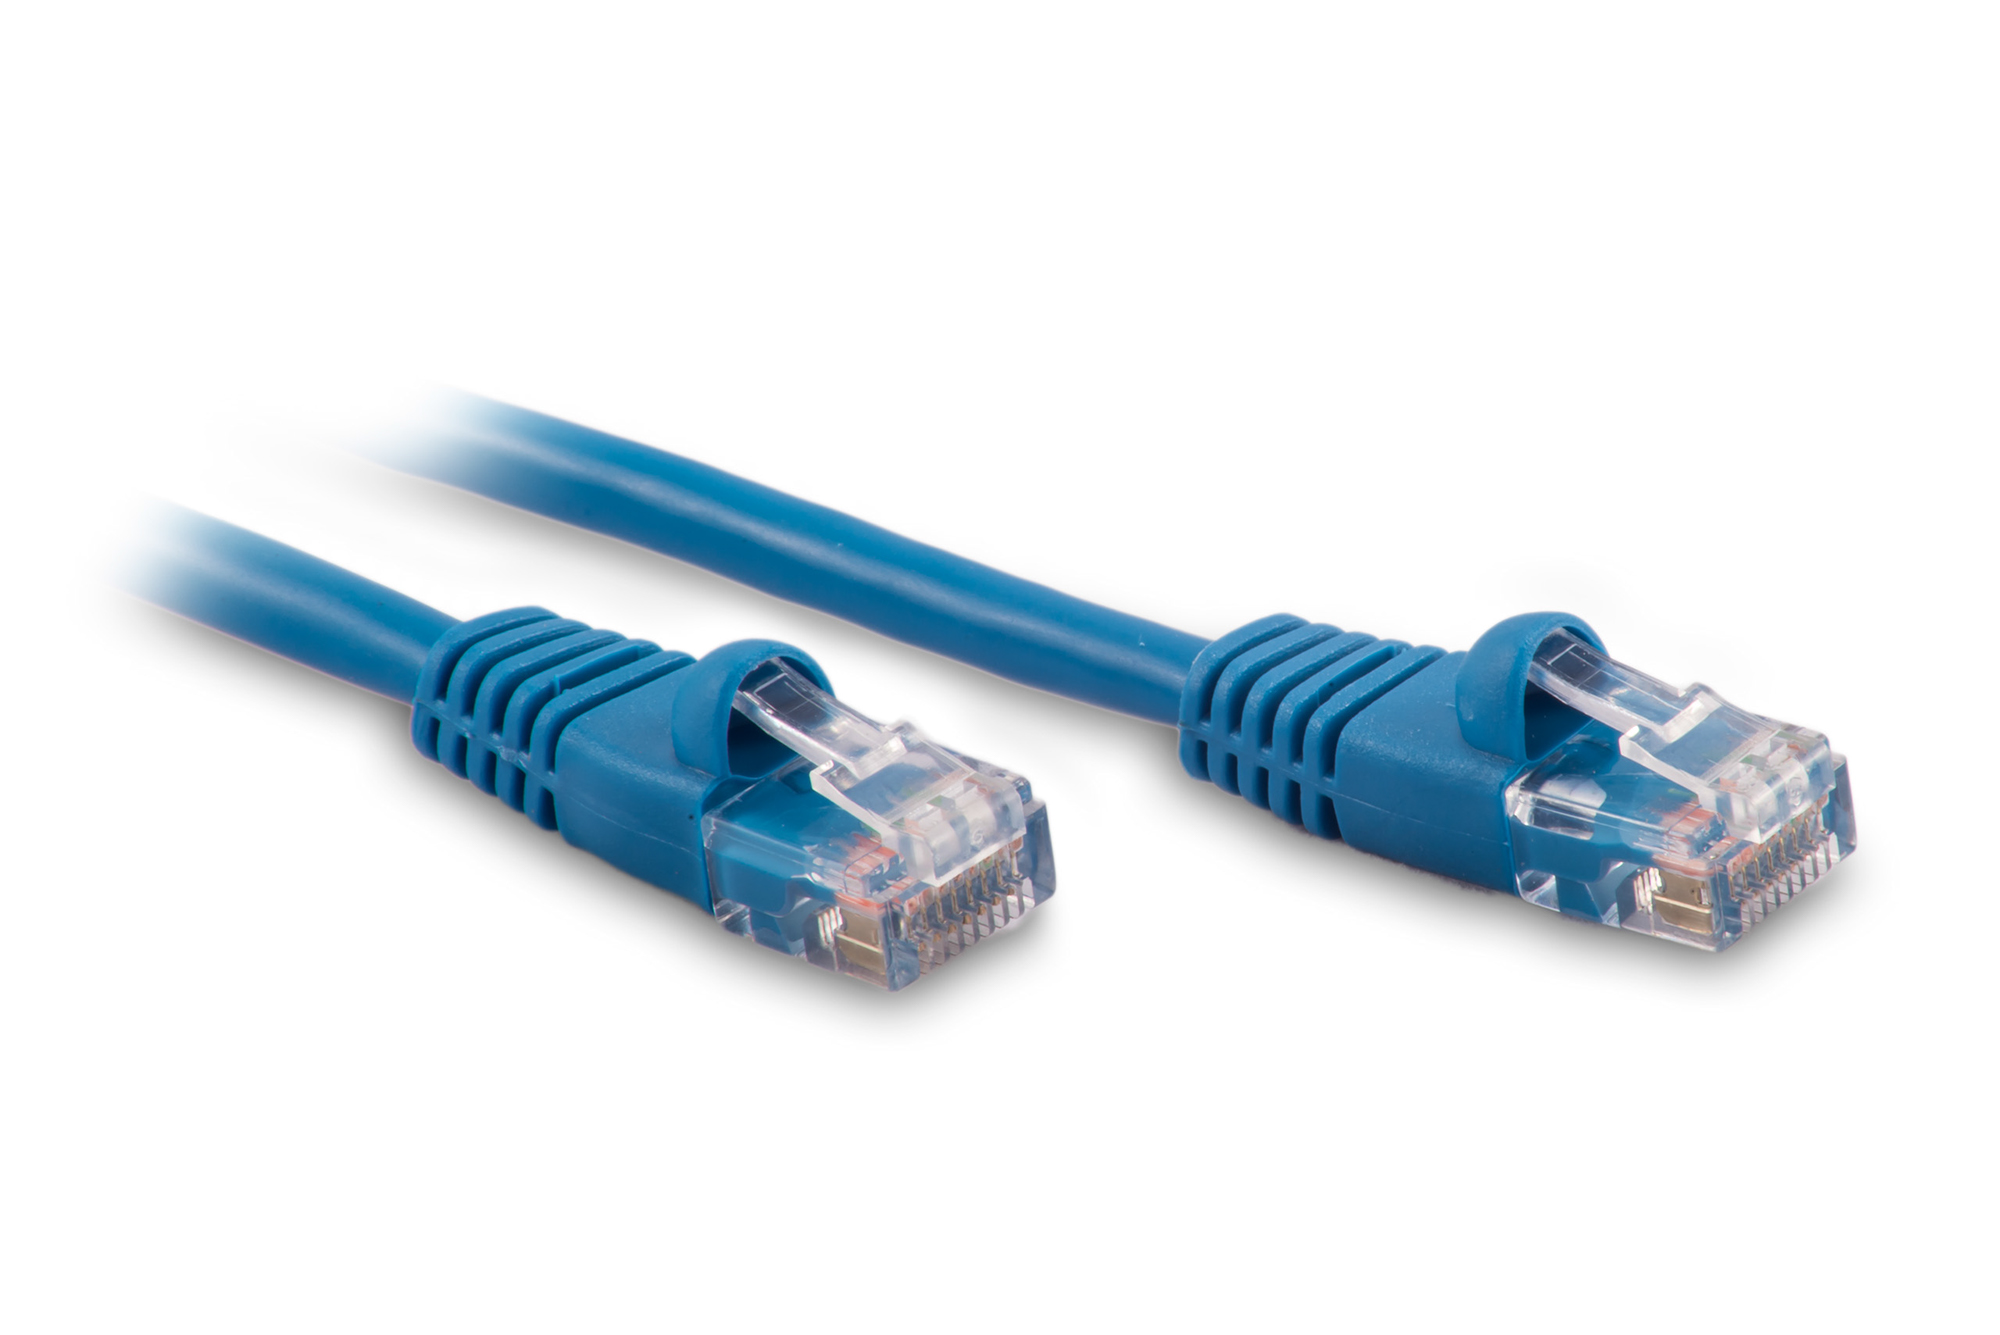 14ft Cat5e Ethernet Patch Cable - Blue Color - Snagless Boot, Stranded, RJ45, 350Mhz, 24AWG